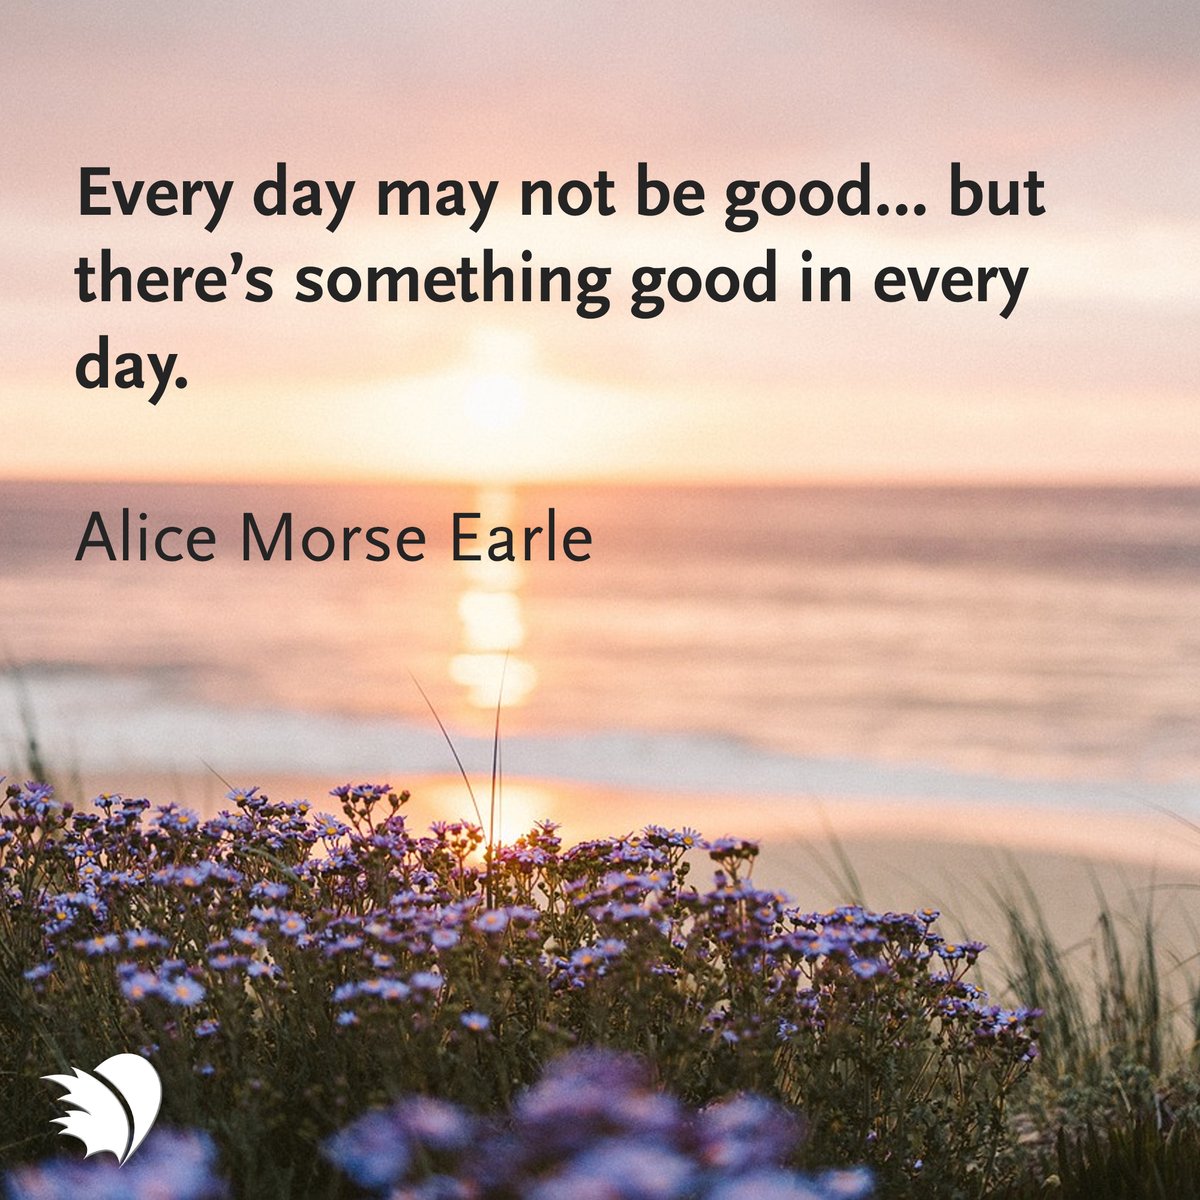 Every day may not be good… but there’s something good in every day 💜 #PHACanada #PositiveVibes #PositiveQuote #PHcommunity #MotivationalQuotes